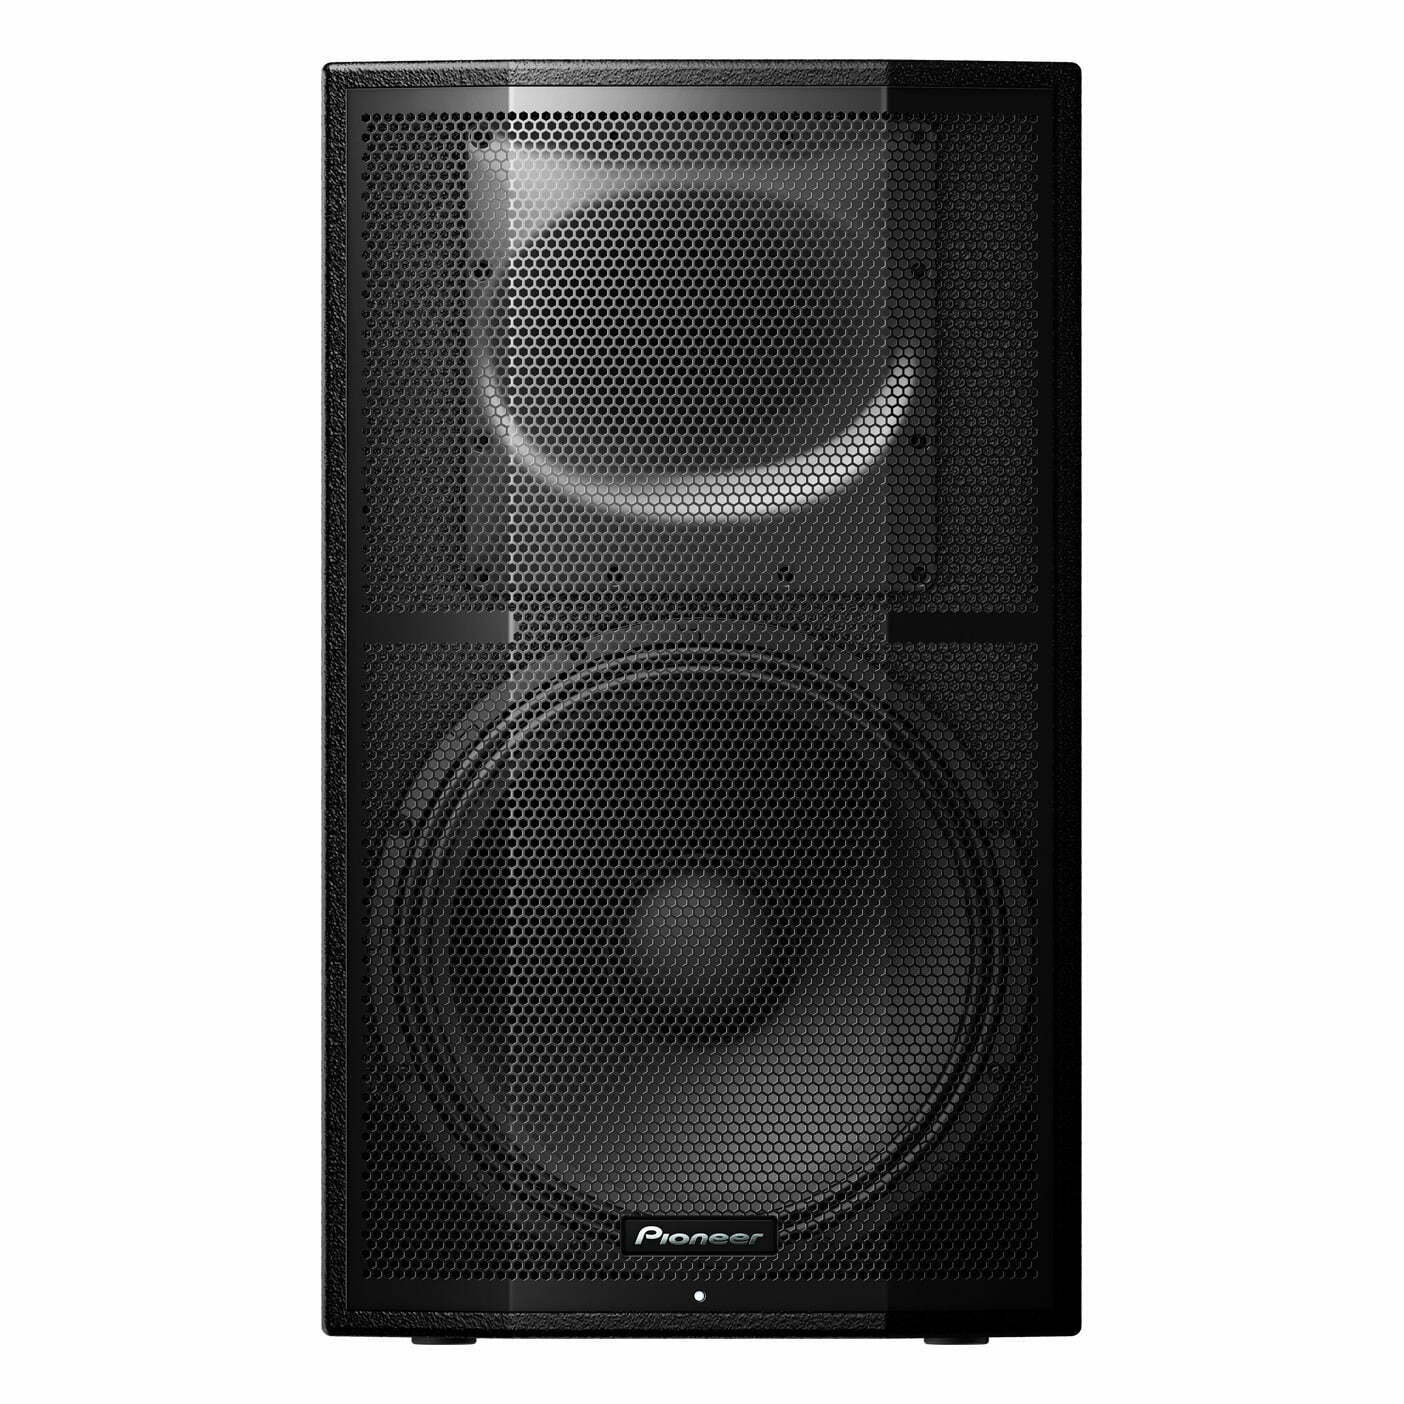 pioneer_xprs15_photo_front|pioneer_xprs15_photo_side|pioneer_xprs15_photo_rear|pioneer_xprs15_photo_angle|pioneer_xprs15_photo_wedge|XPRS_speaker_12inch_side_high|XPRS_speaker_12inch_rear_high|XPRS_speaker_pr_dual-angle_B_low|XPRS_speaker_pr_dual-angle_A_low